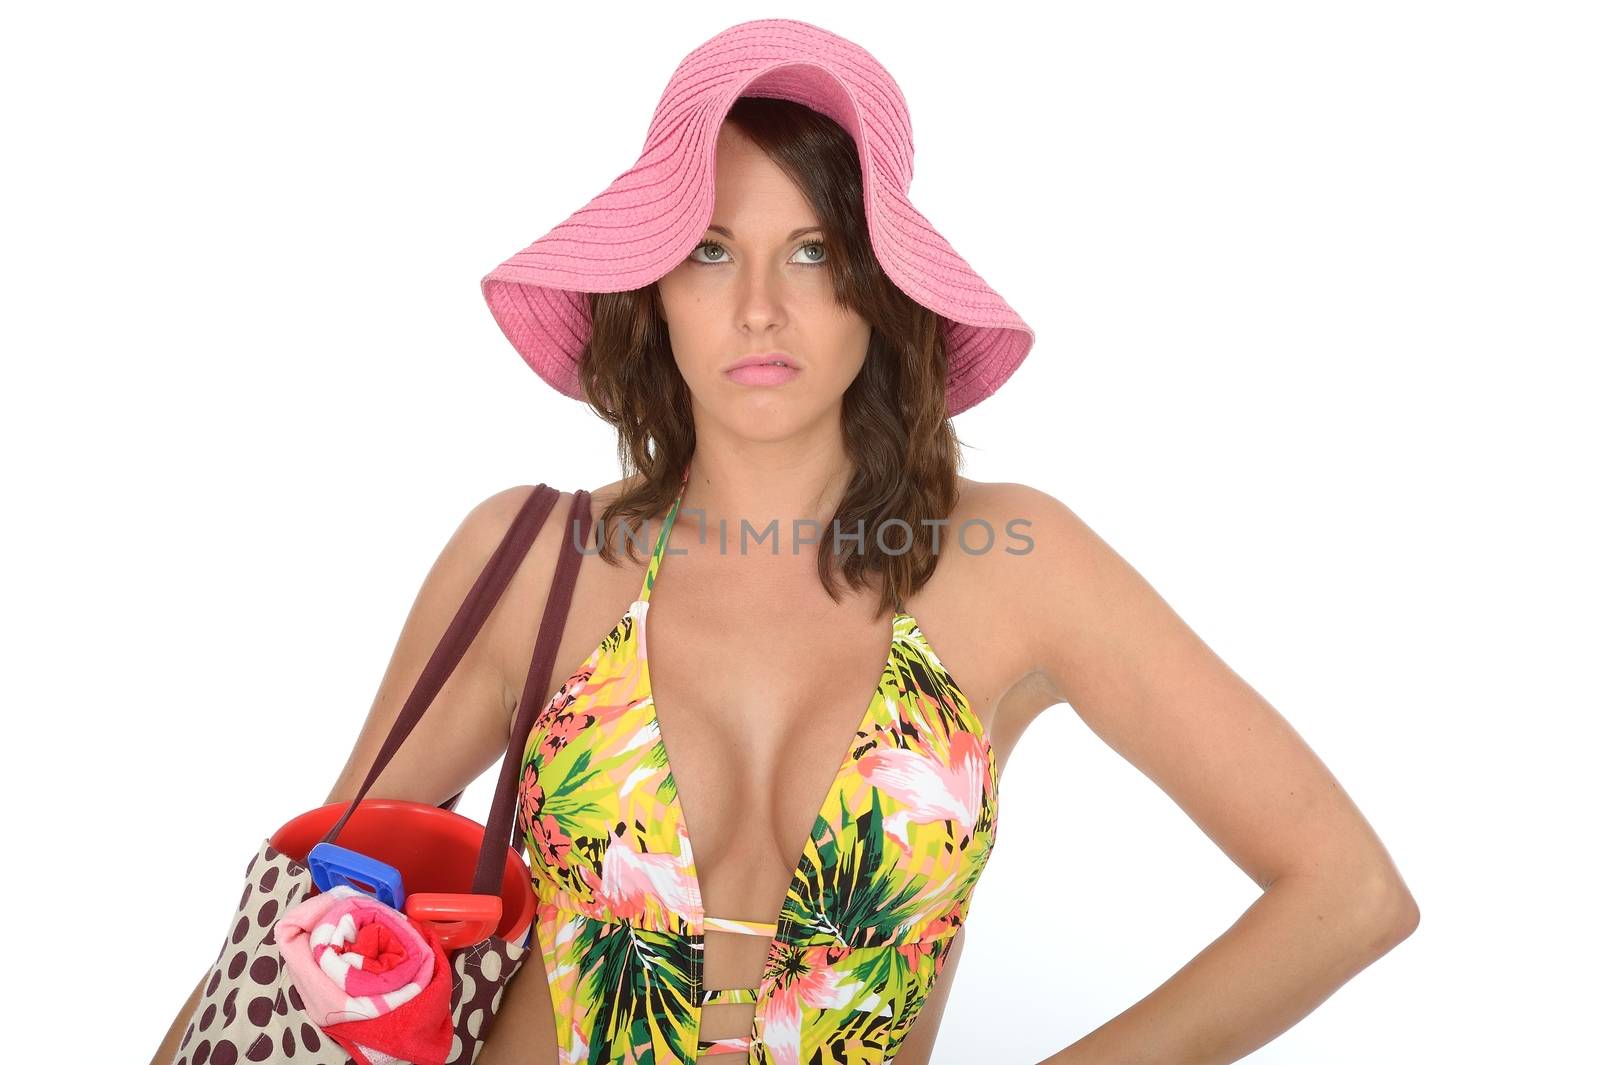 Young Woman Wearing a Swim Suit and a Pink Straw Hat on Holiday by Whiteboxmedia